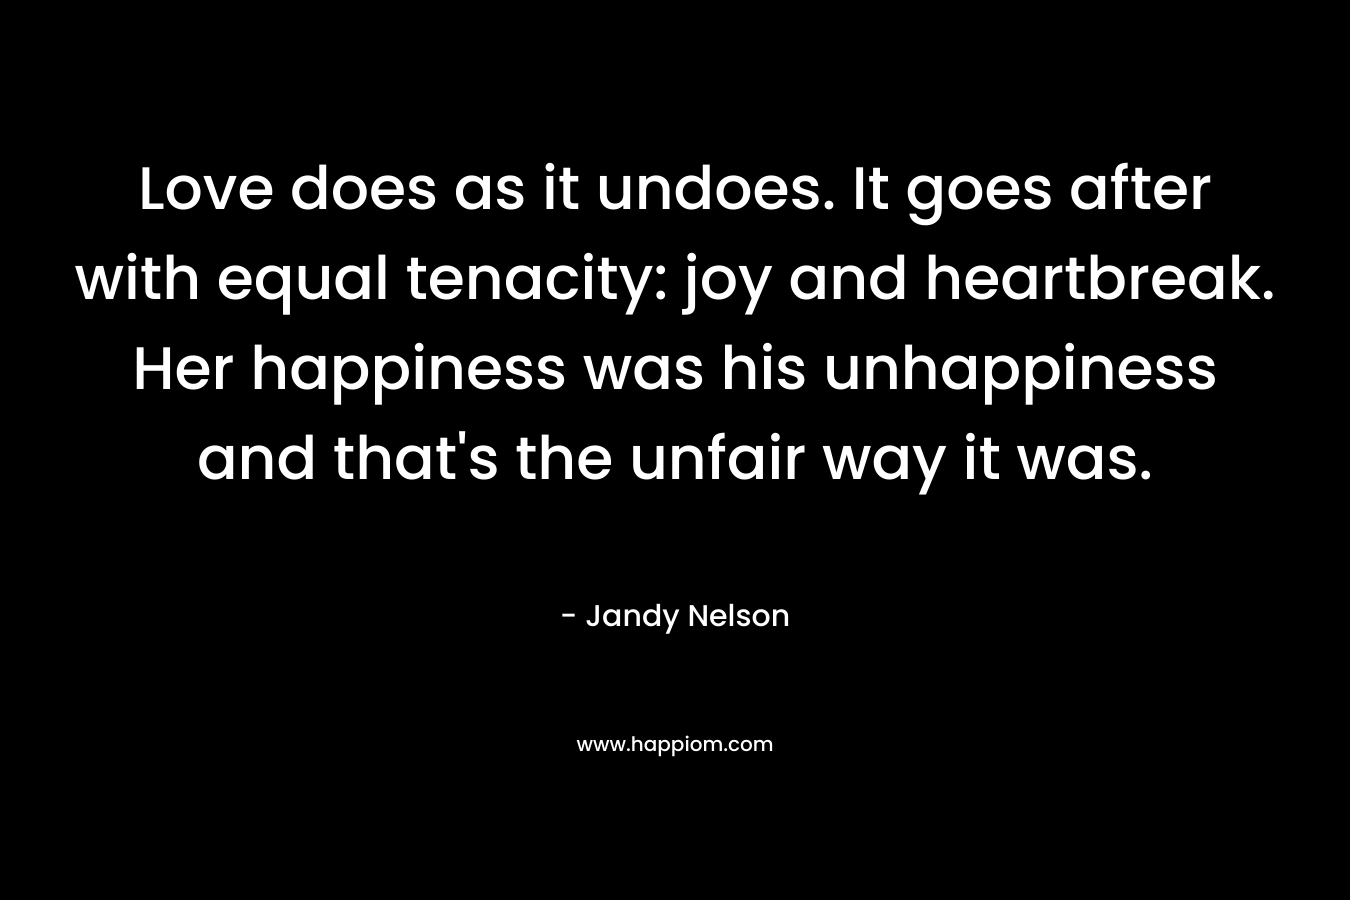 Love does as it undoes. It goes after with equal tenacity: joy and heartbreak. Her happiness was his unhappiness and that’s the unfair way it was. – Jandy Nelson